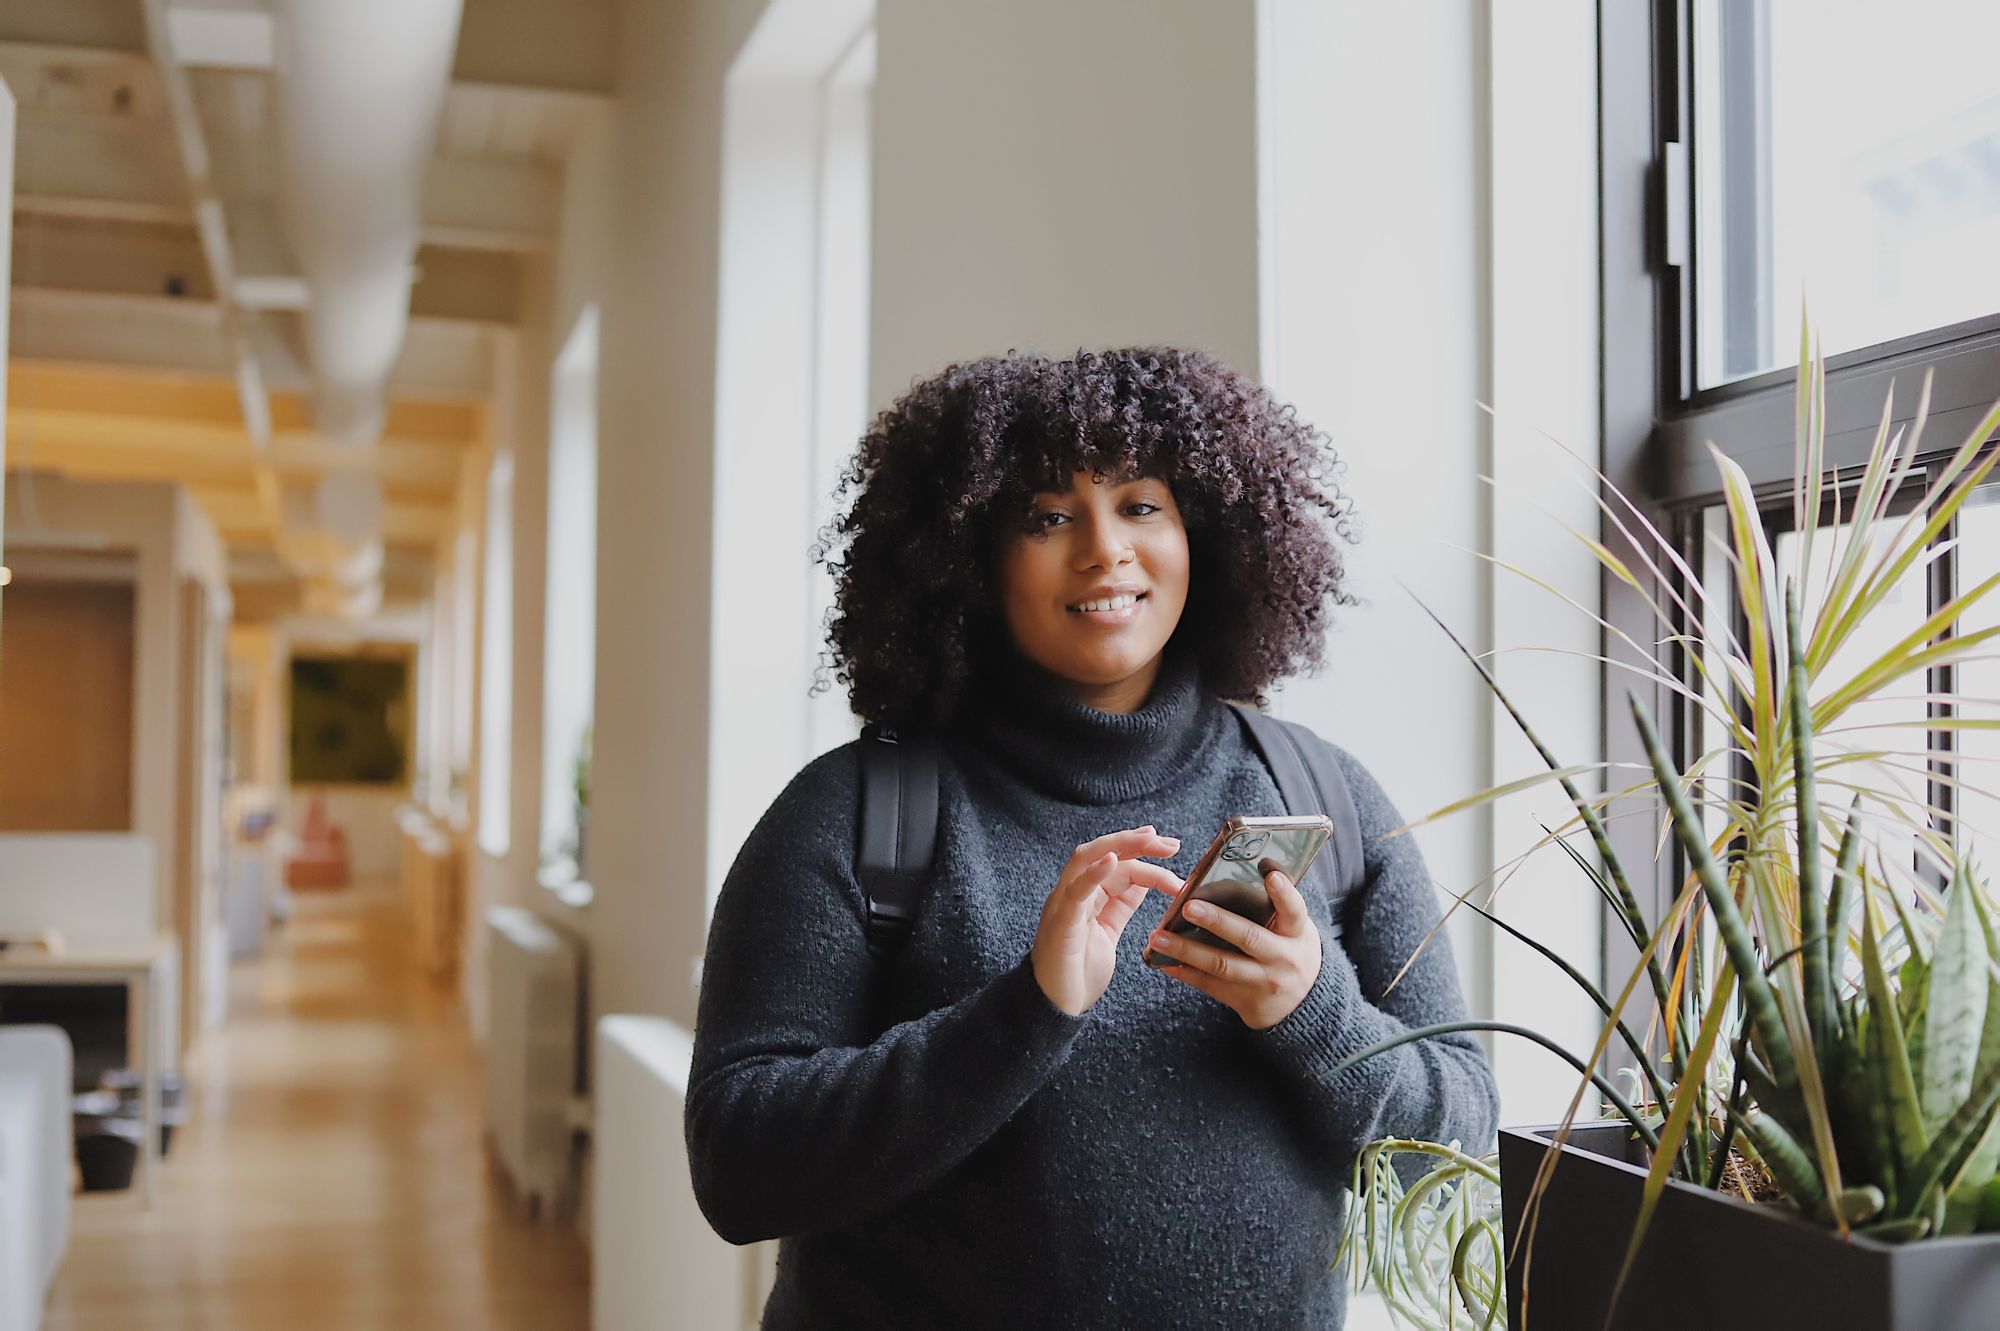 A Black woman with natural curly hair smiles at the camera while typing on her phone in a brightly lit hallway.